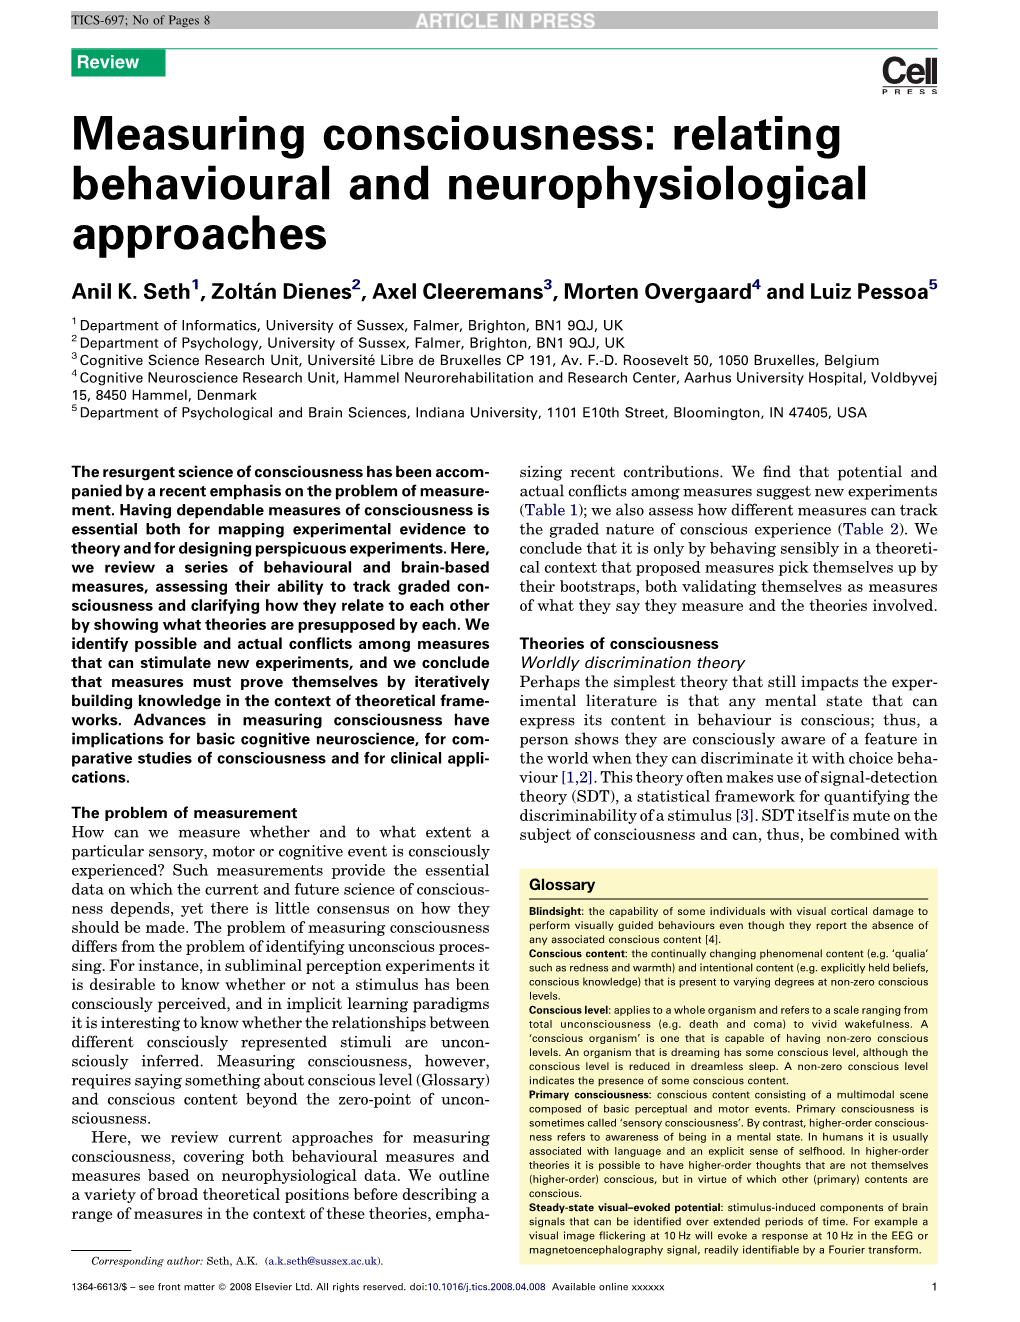 Measuring Consciousness: Relating Behavioural and Neurophysiological Approaches